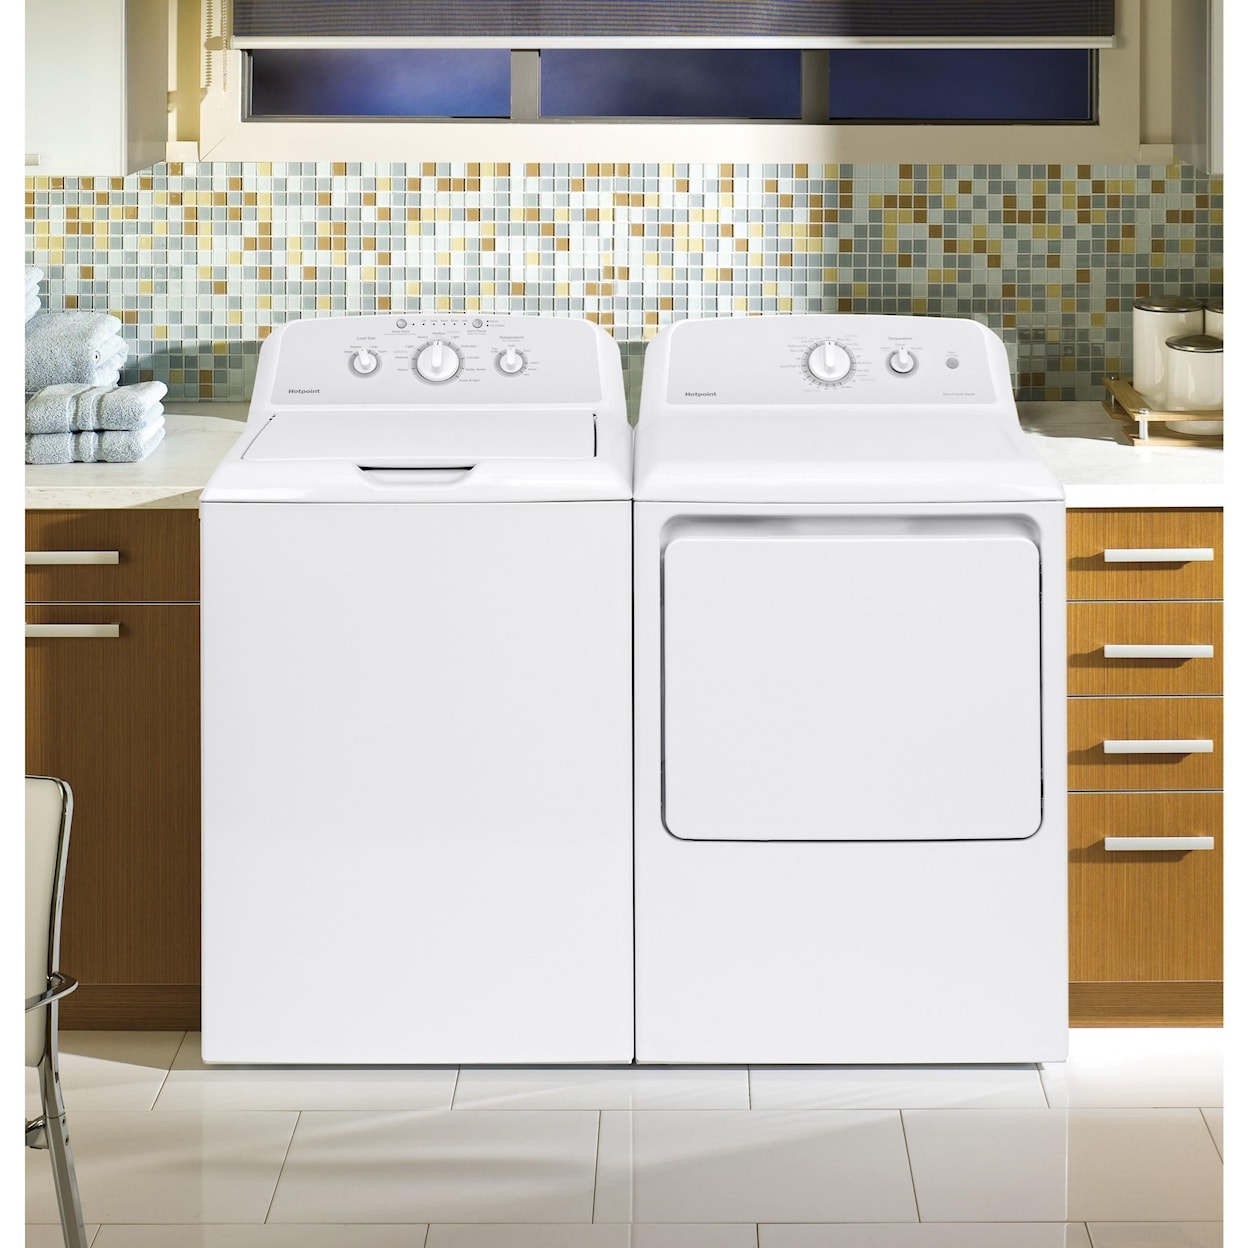 GE Appliances Hotpoint Home Laundry Hotpoint® 3.8 cu. ft. Capacity Washer